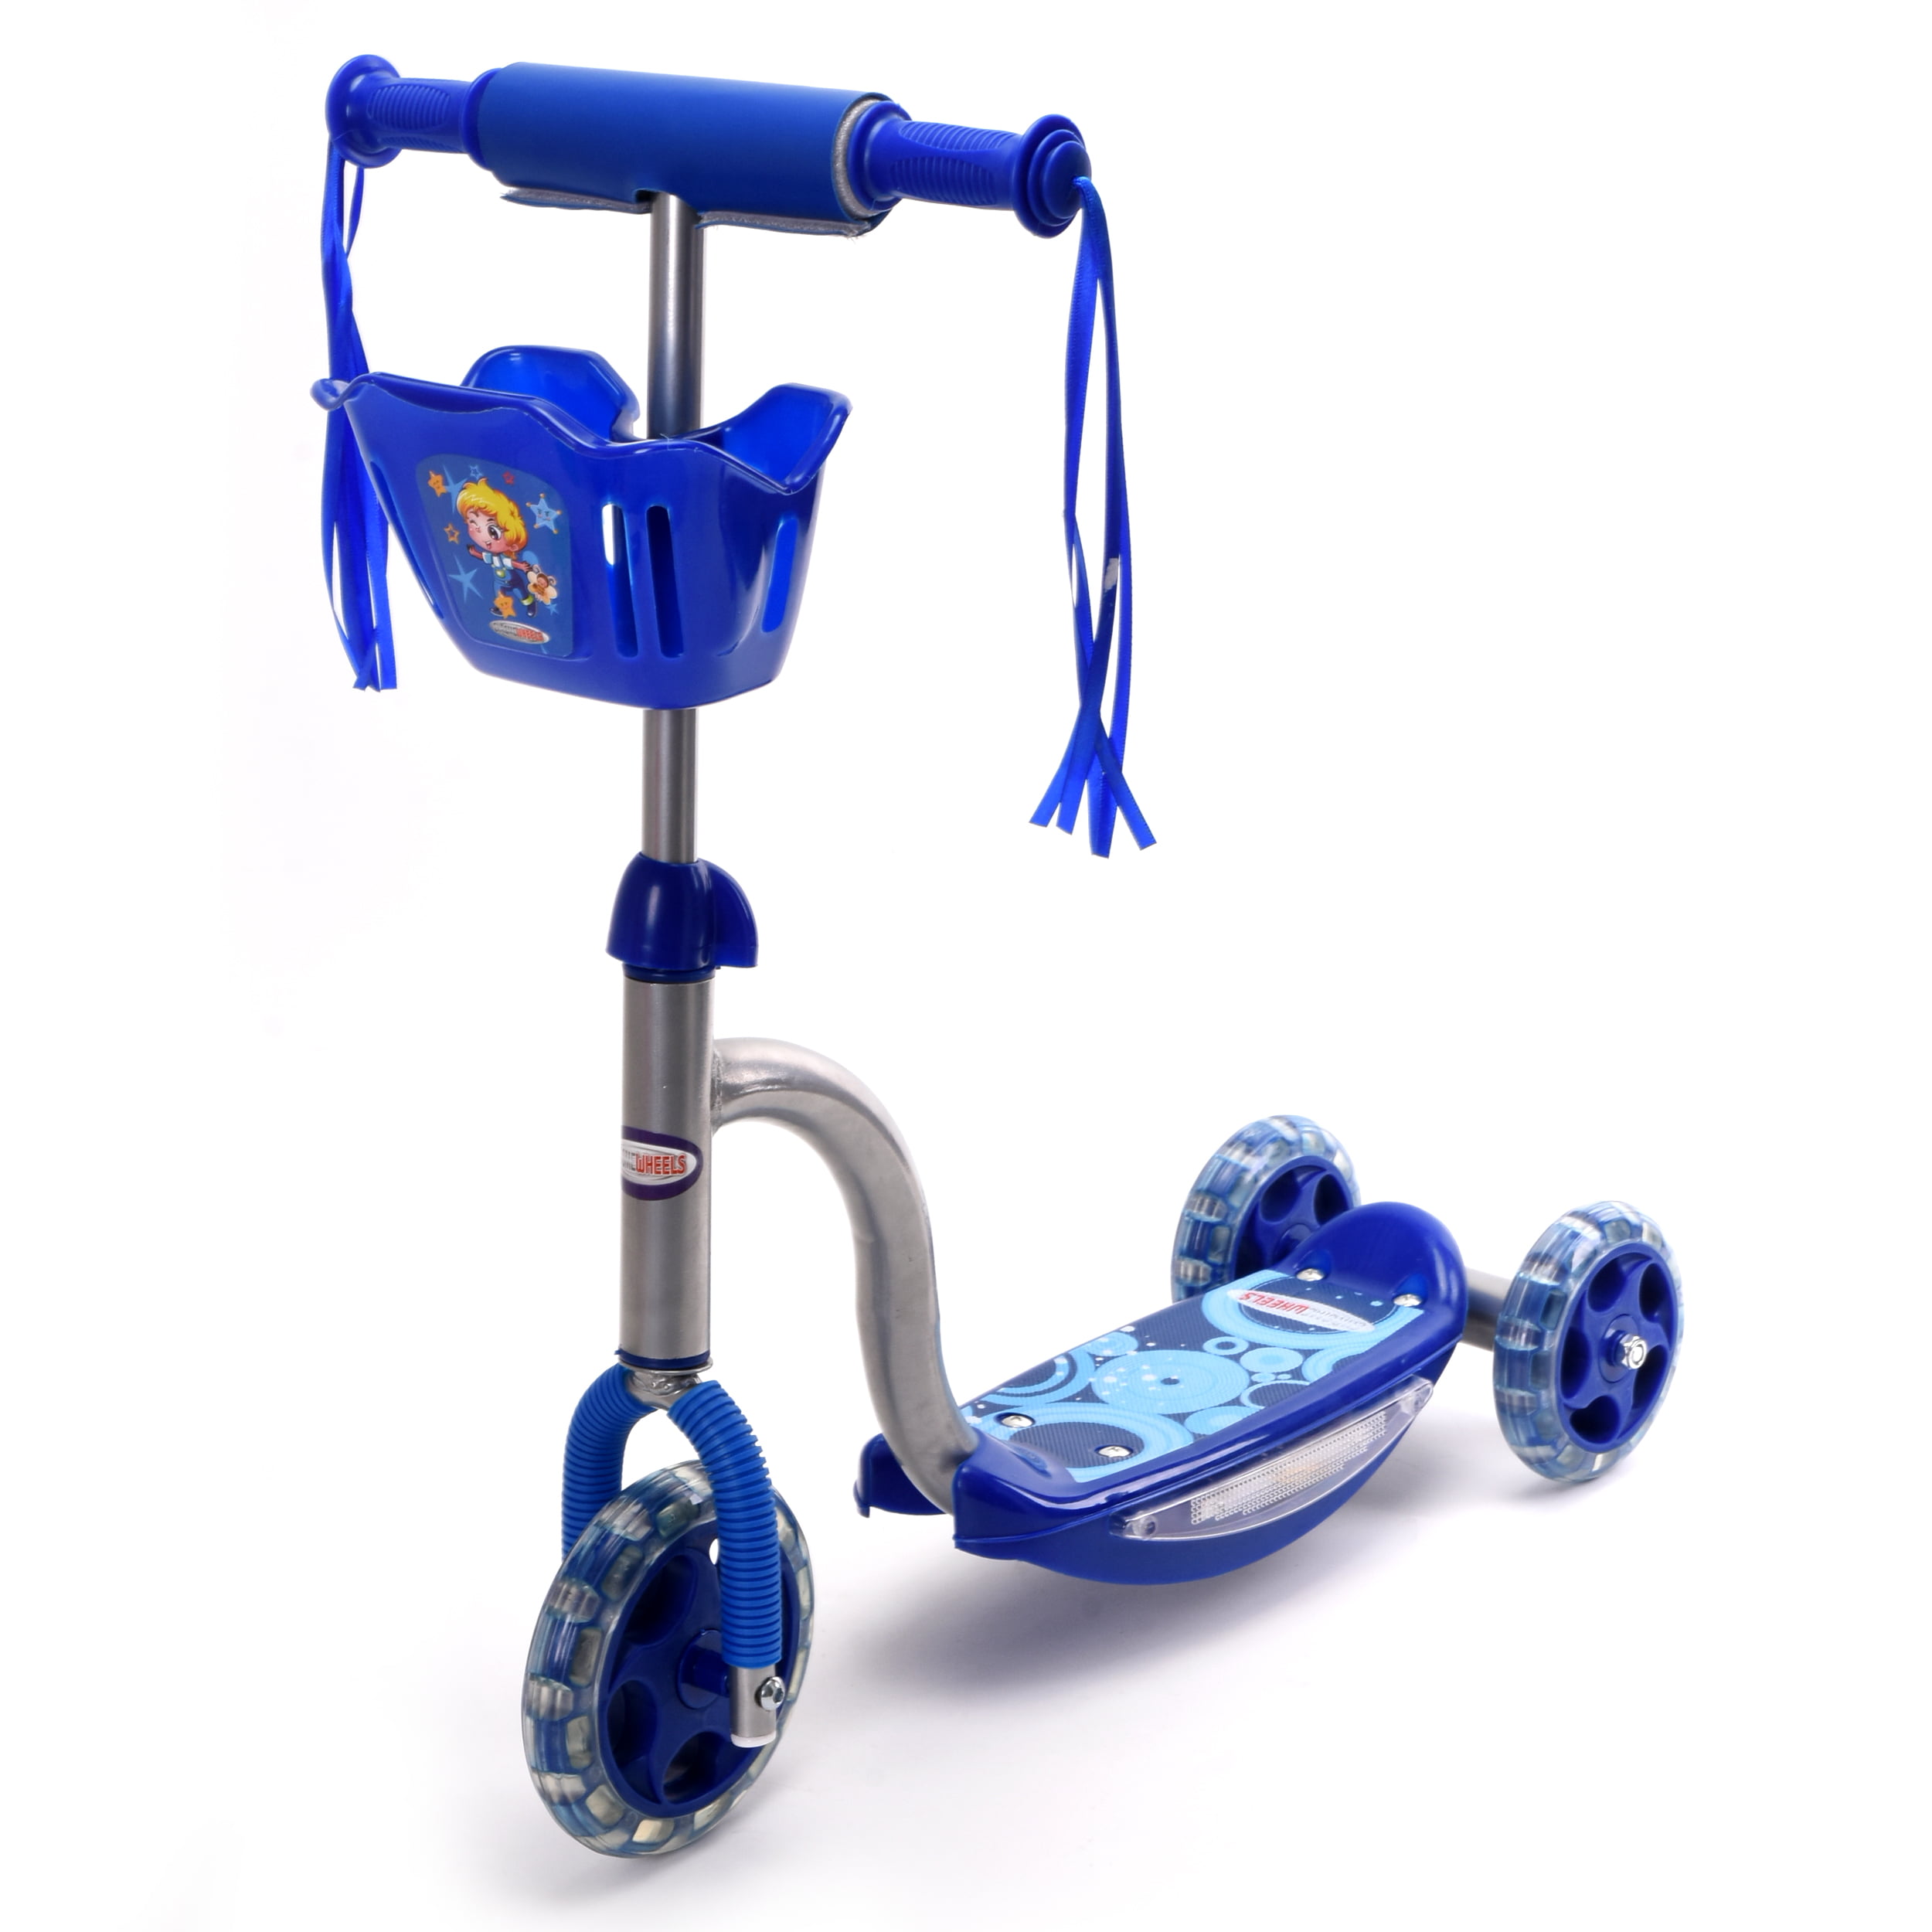 New Blue   3 IN 1 Lean to steer Kick Mini Scooter With Foot Rest Flashing Wheels 